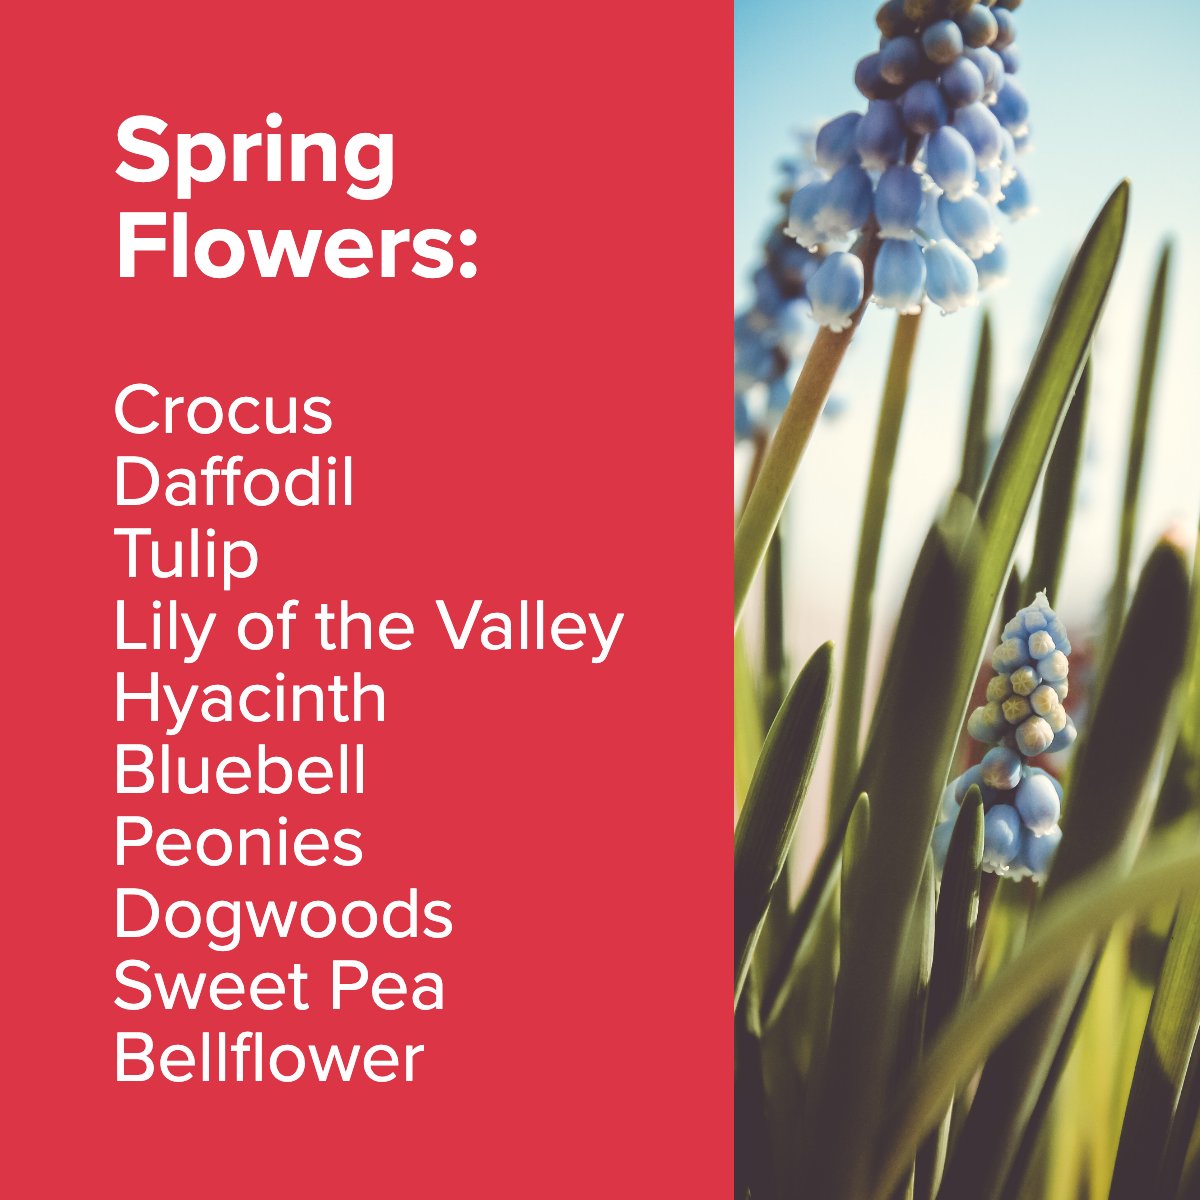 When spring arrives, why not welcome it with a garden full of blossoms to chase the winter blues away? 🌼🌺

#springflowers🌸     #flowersspringtime     #lovespringflowers     #springflowersblooming
#LagunaNiguel #LagunaBeach #DanaPoint #OrangeCountyHousing